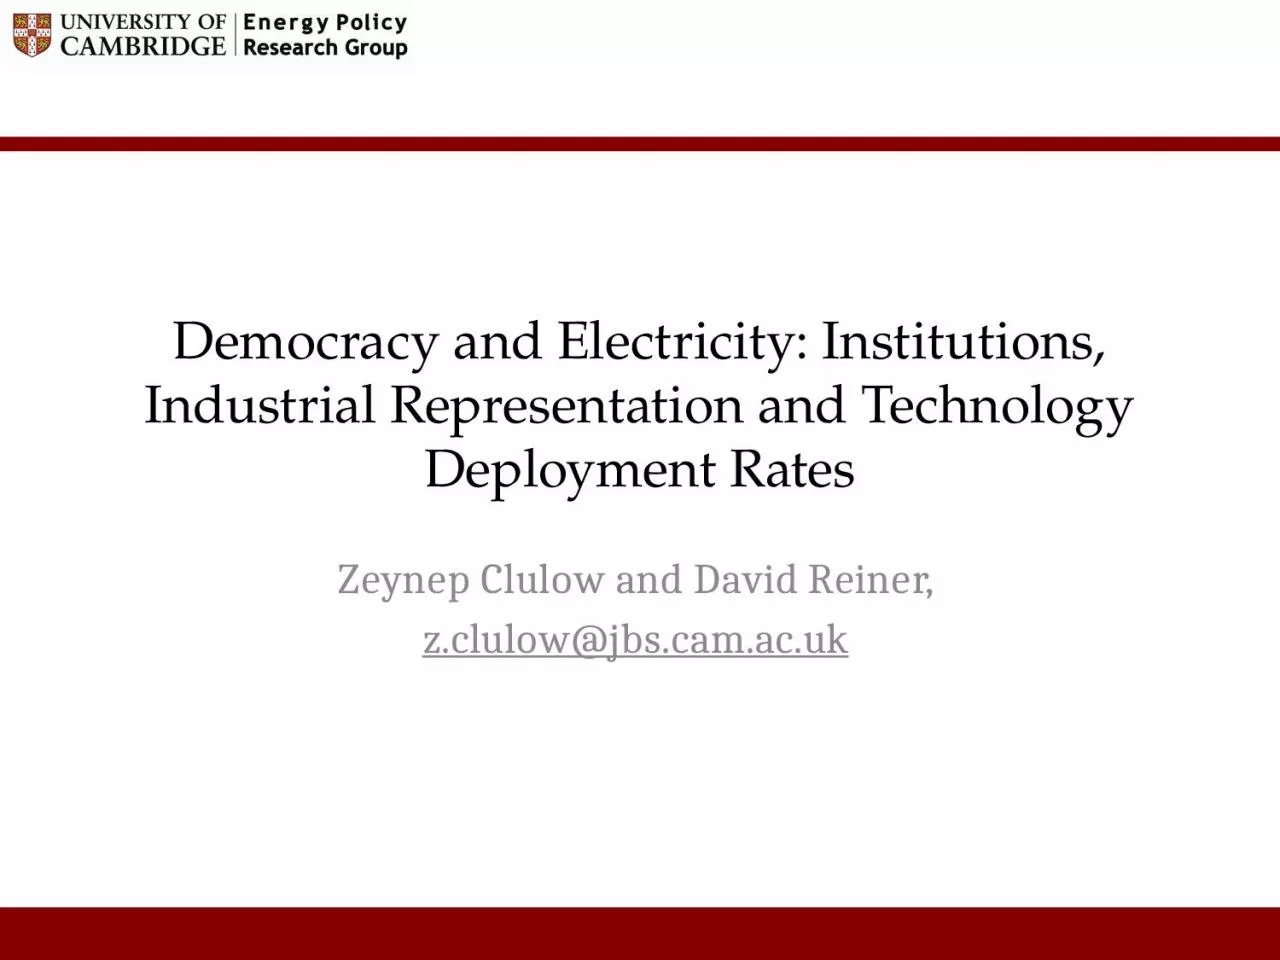 Democracy and Electricity: Institutions, Industrial Representation and Technology Deployment